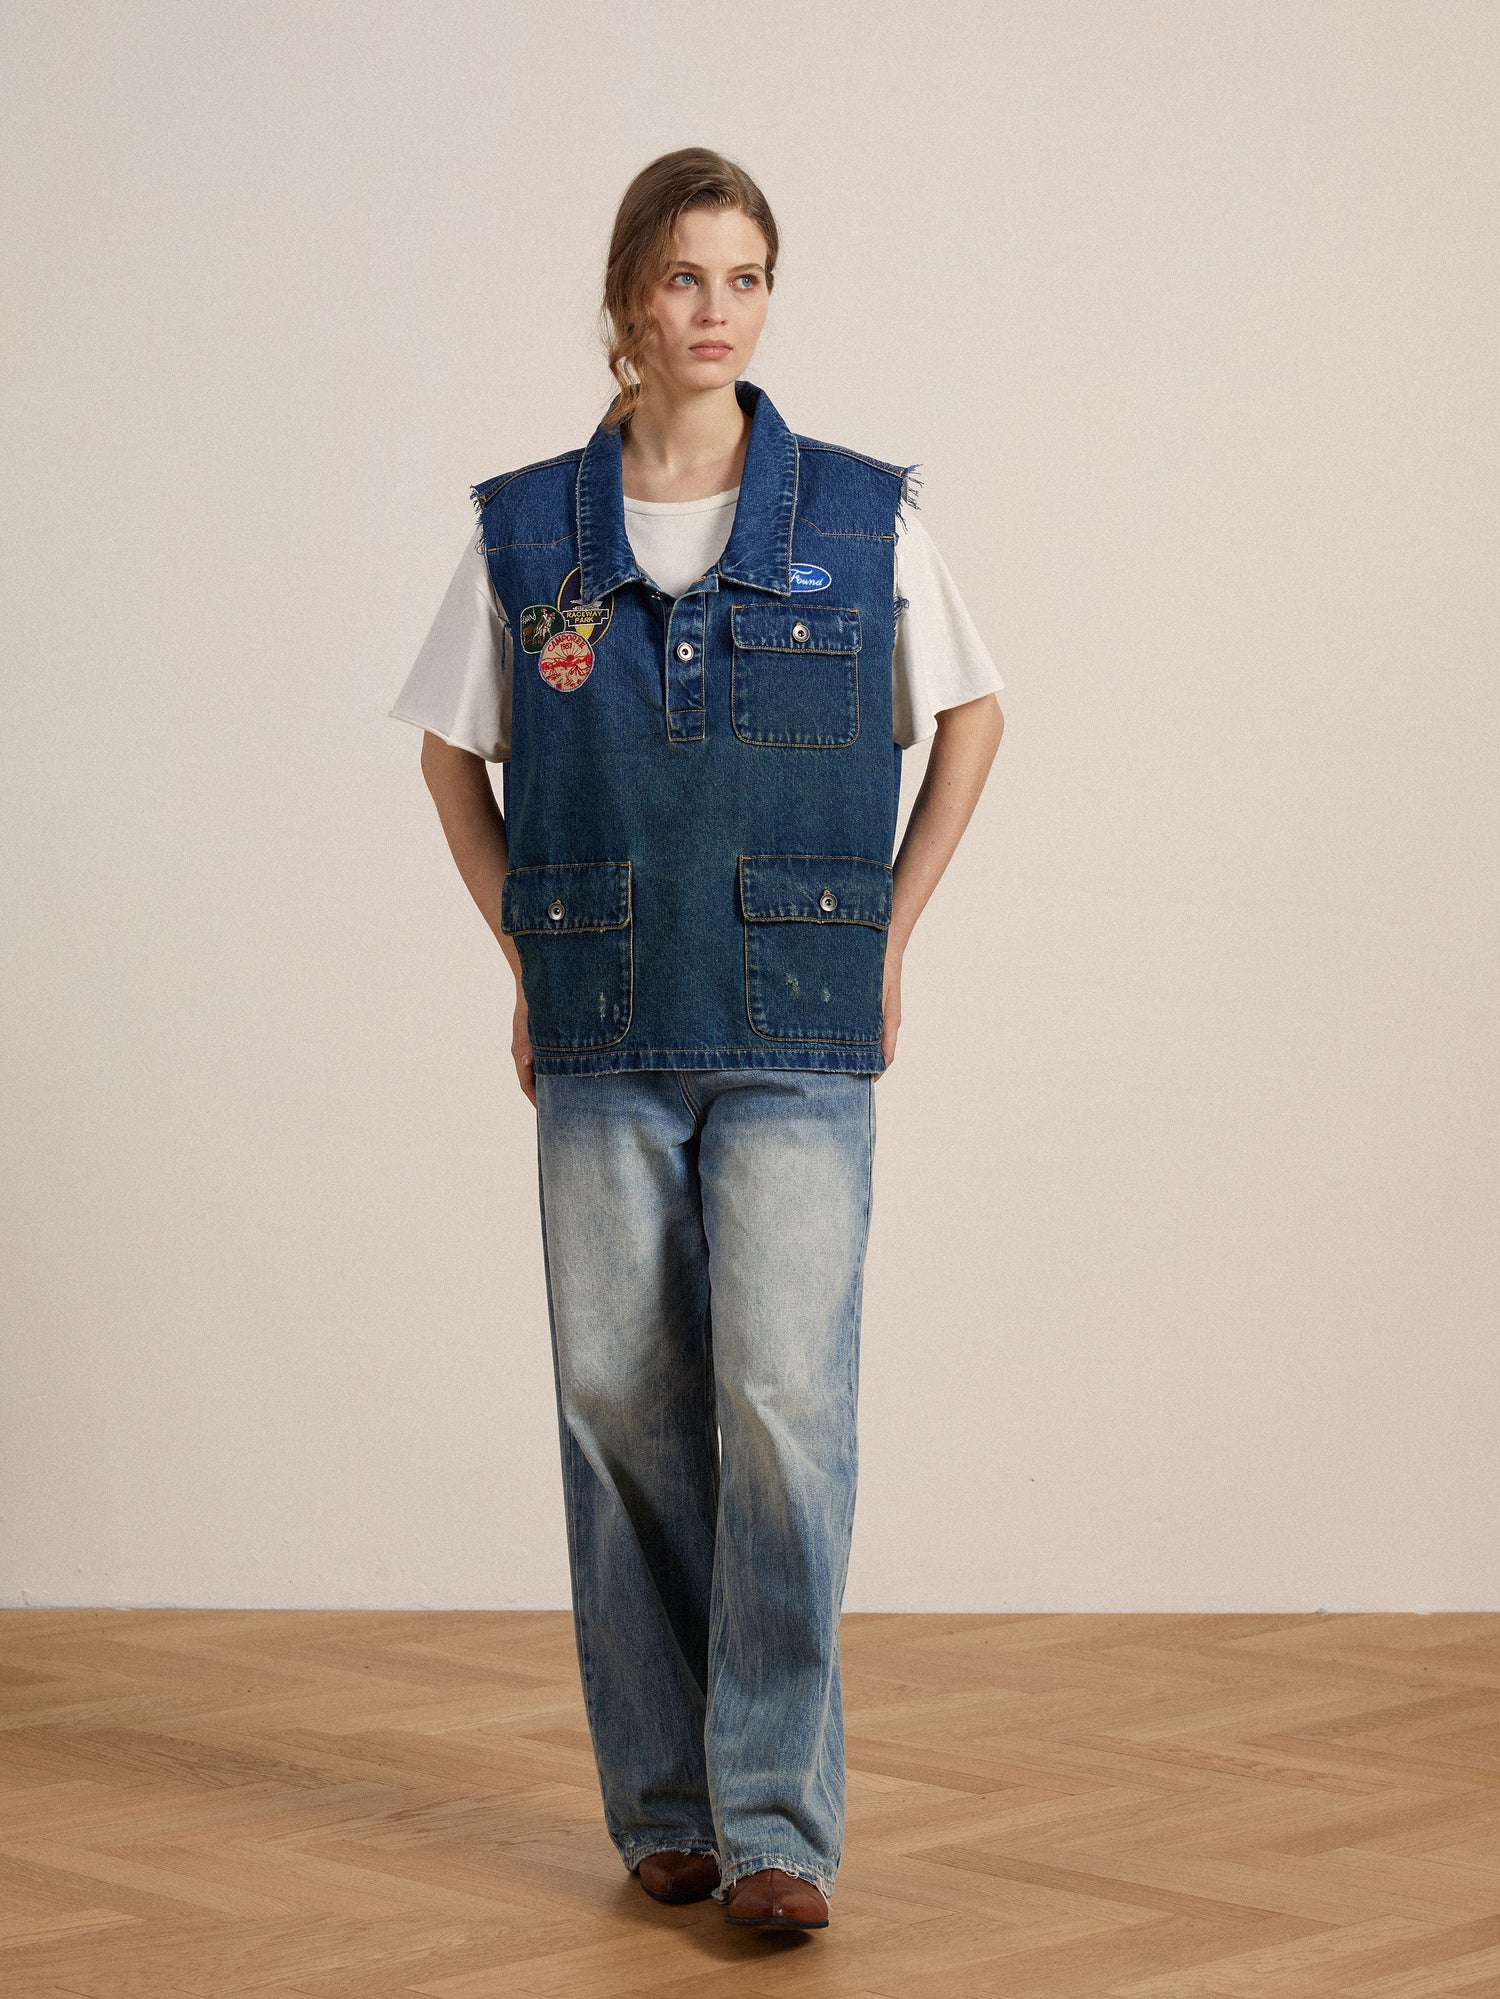 A woman in a Found Raw Cut Patch Mechanic Denim Vest adorned with embroidered patches.